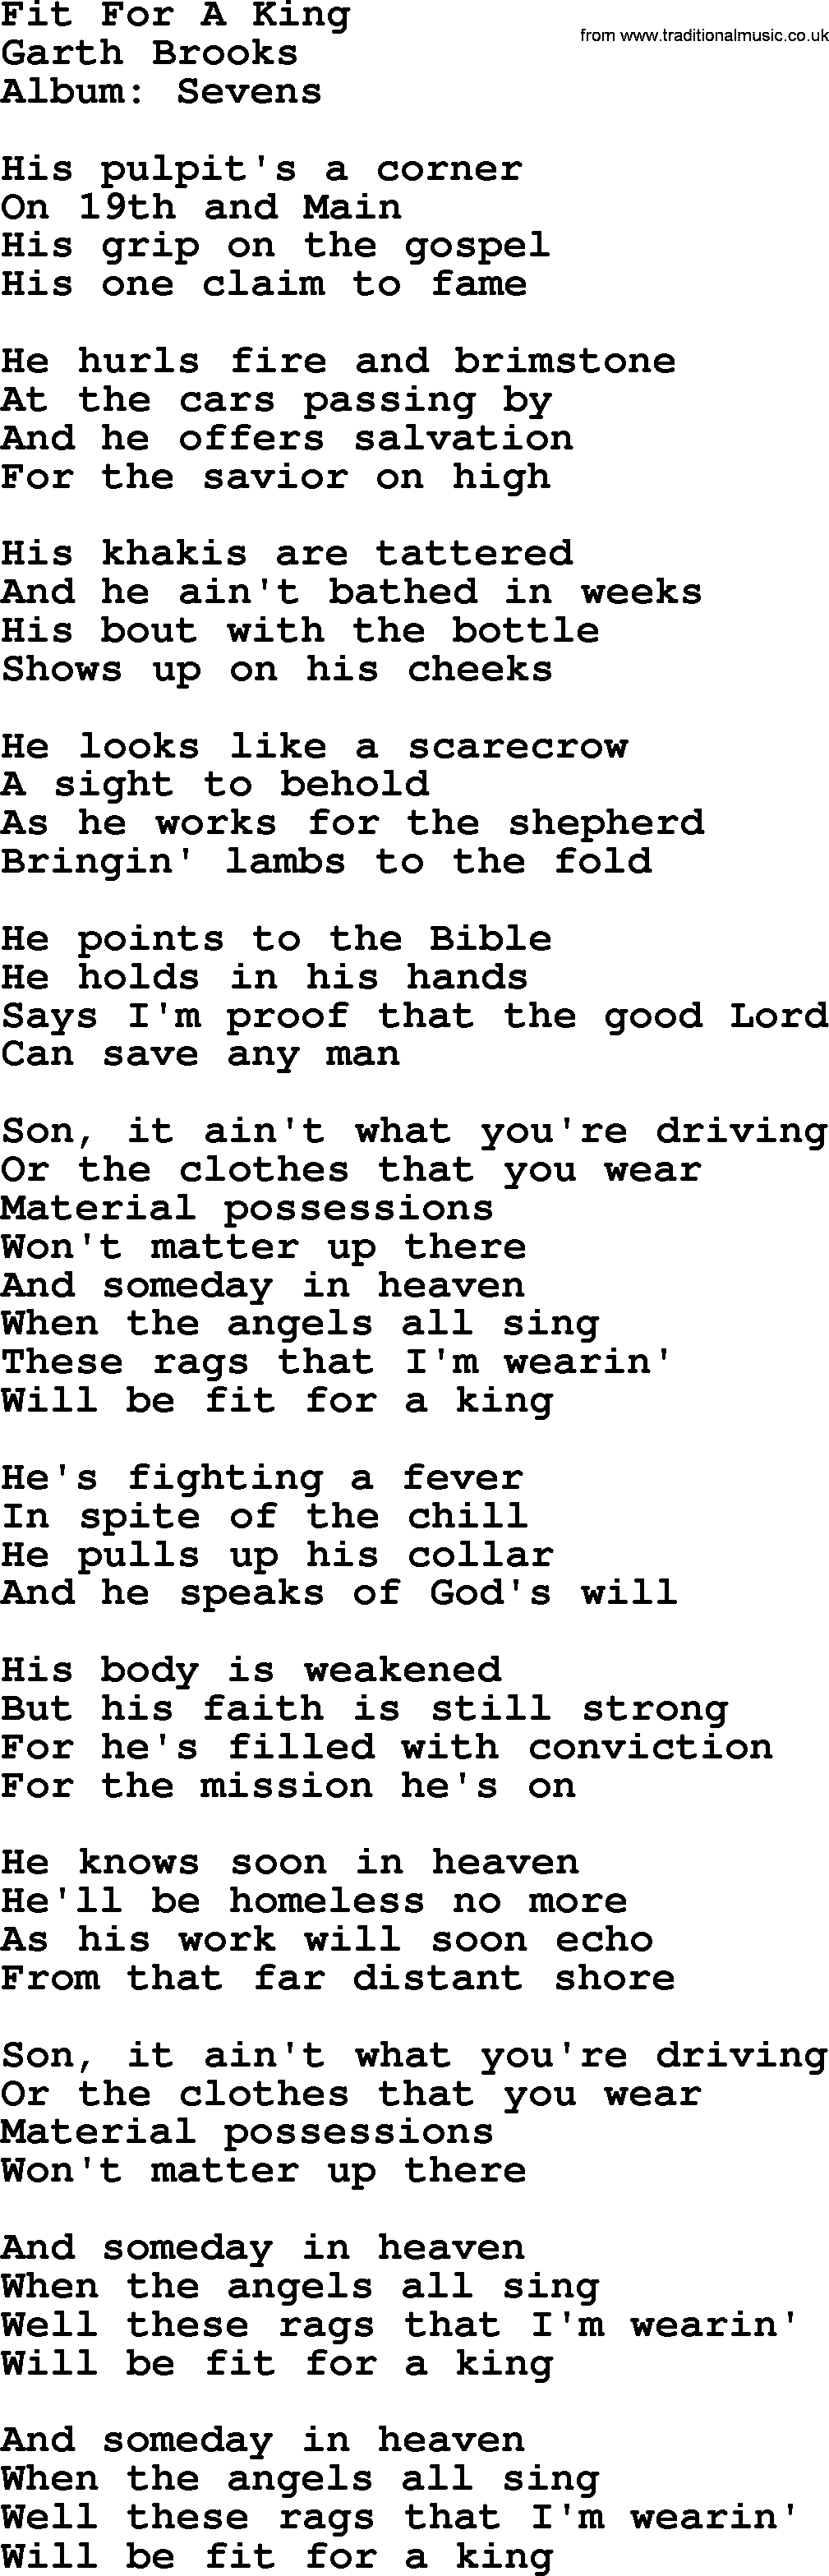 Garth Brooks song: Fit For A King, lyrics